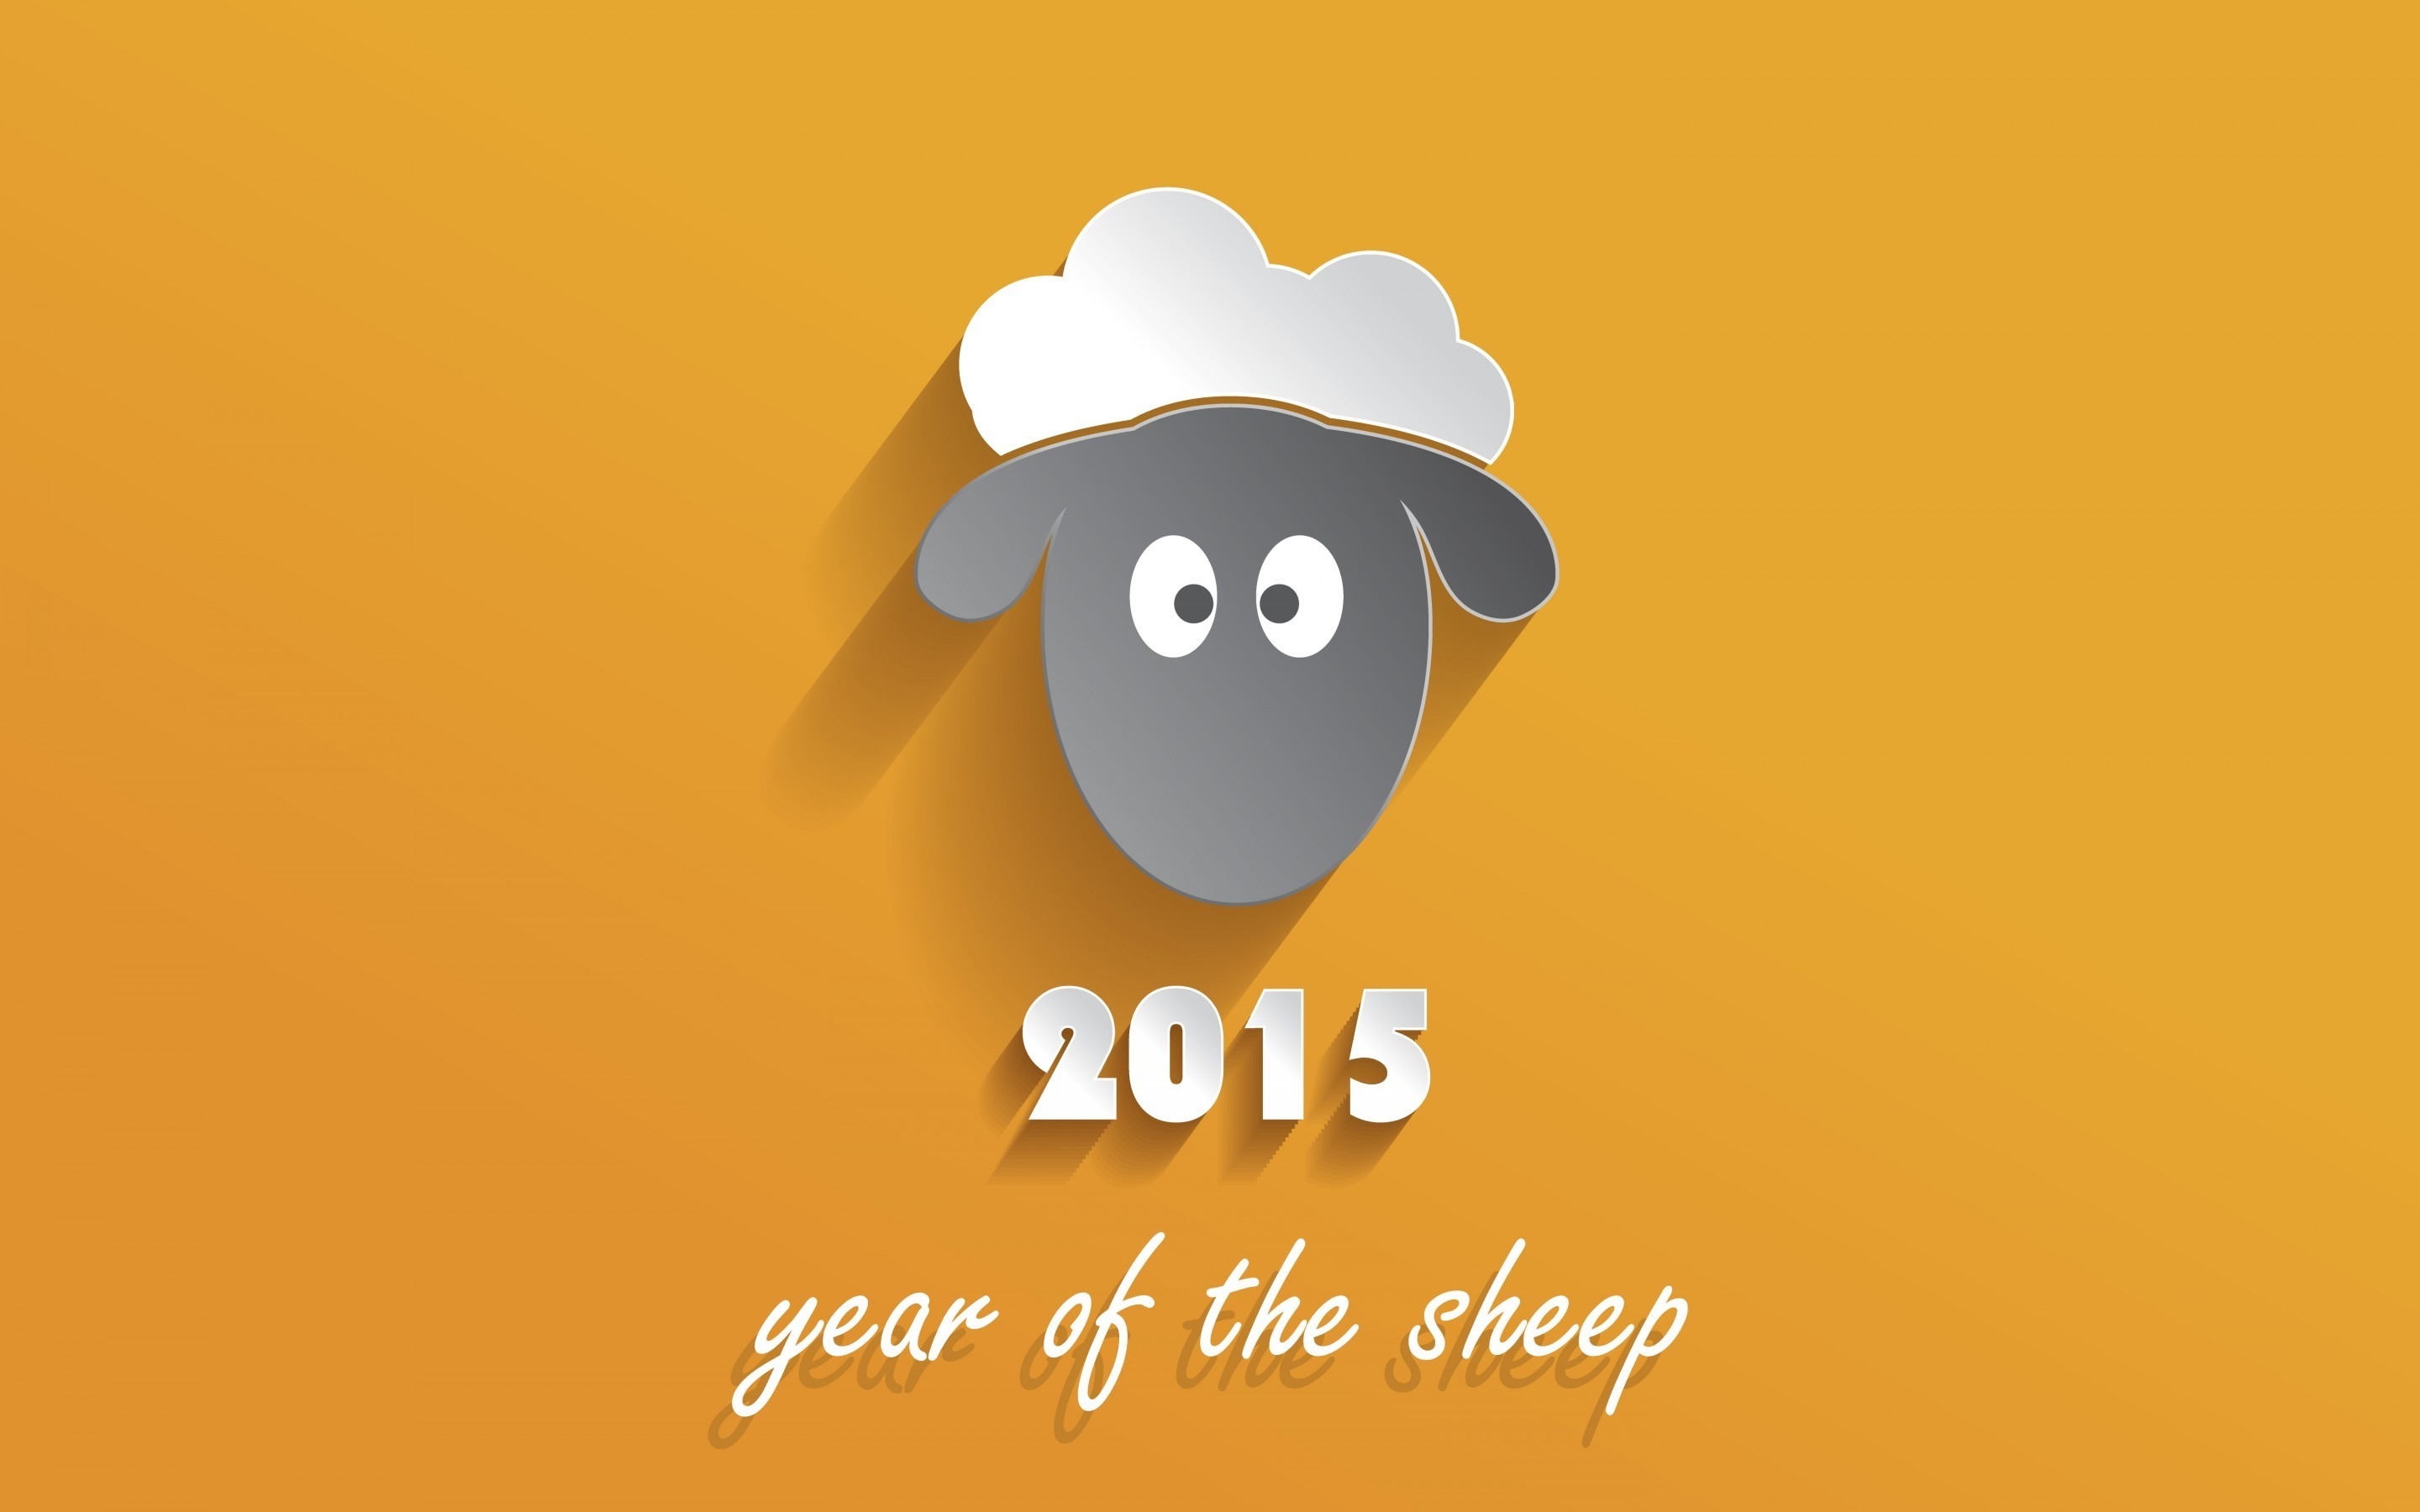 2015 Year of the Sheep for 2880 x 1800 Retina Display resolution